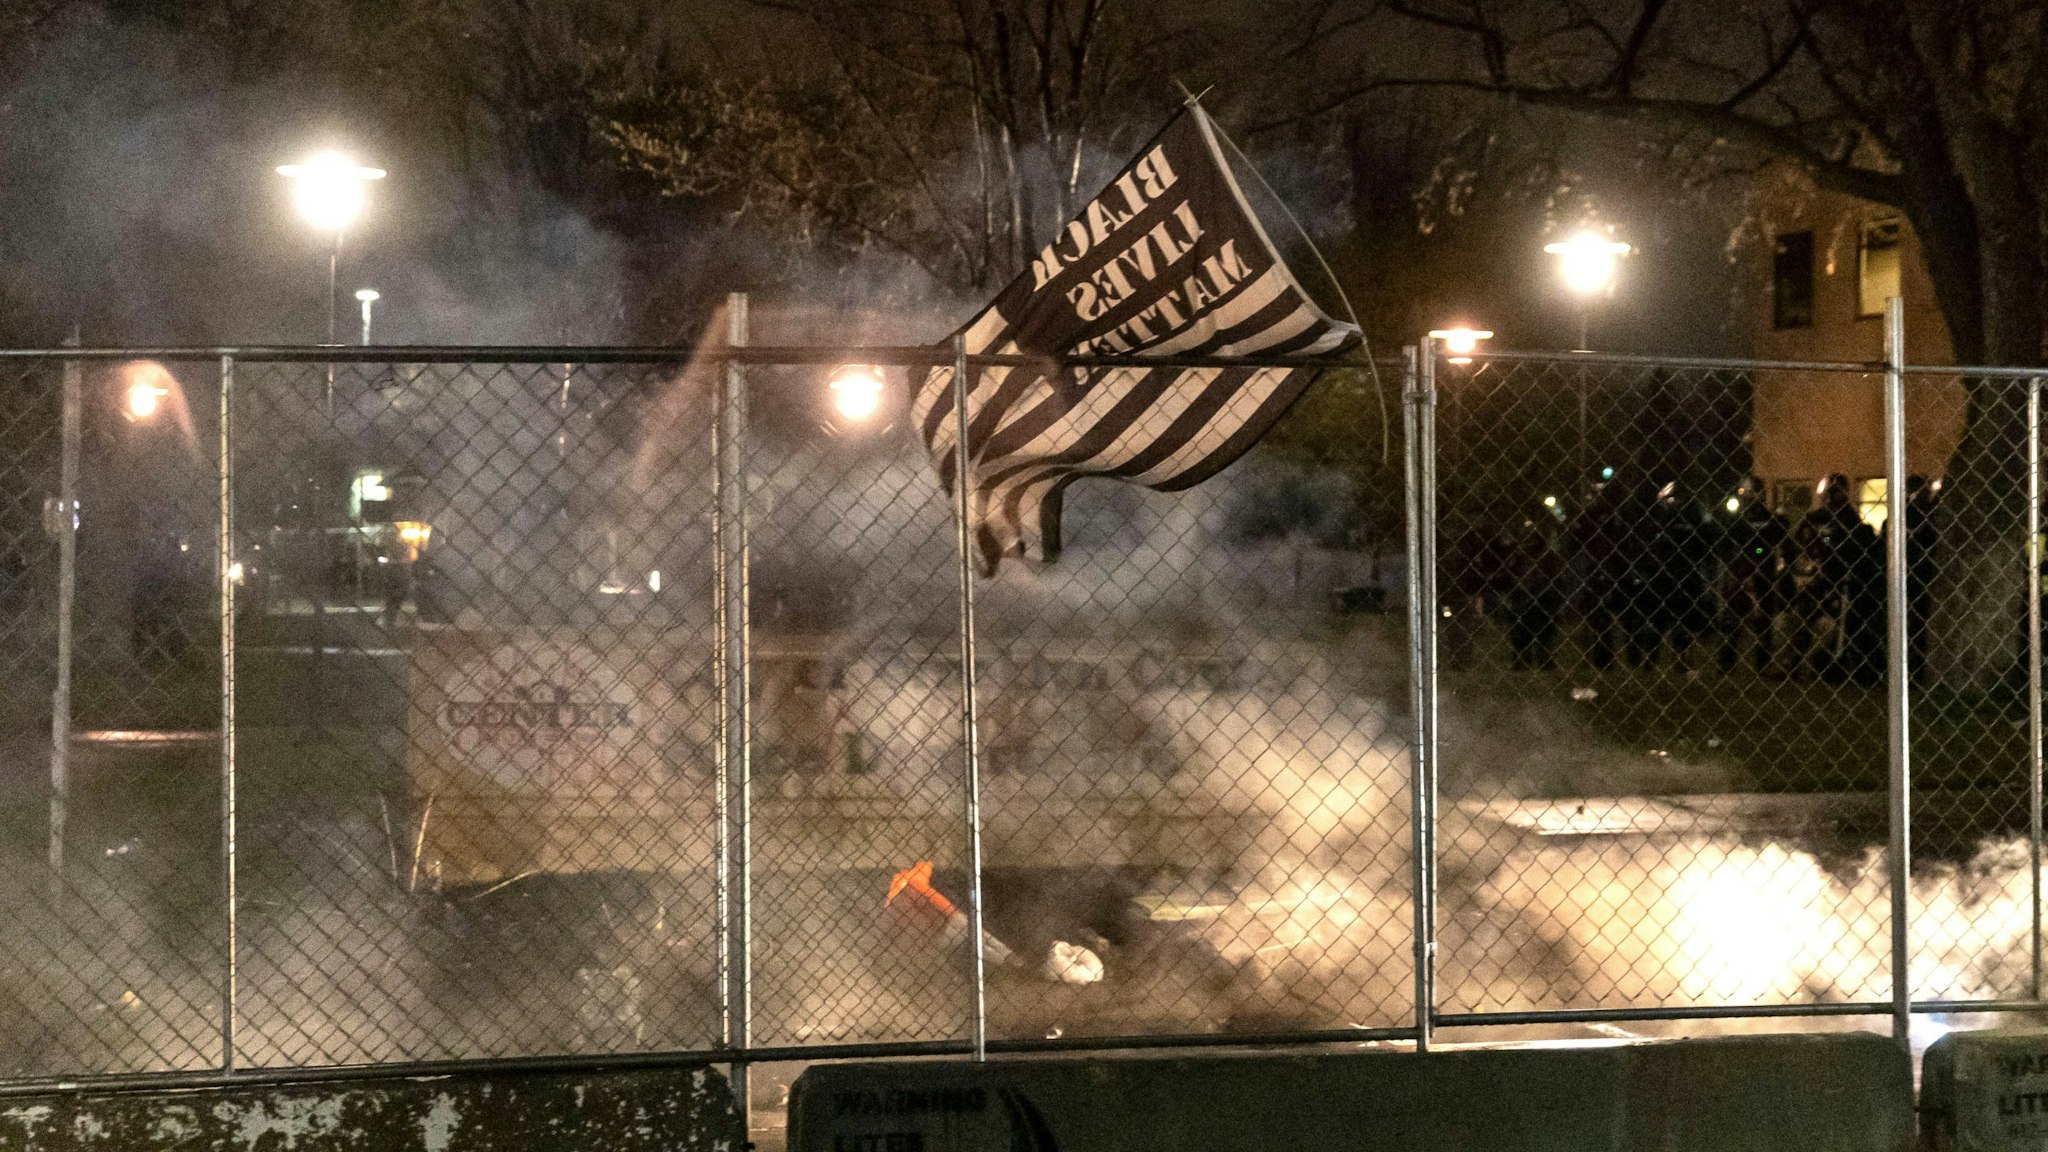 A Black Lives Matter flag is seen after curfew as demonstrators protest the death of Daunte Wright who was shot and killed by a police officer in Brooklyn Center, Minnesota on April 12, 2021. - A suburb of Minneapolis was under curfew early April 12, 2021 after US police fatally shot a young Black man, sparking protests not far from where a former police officer was on trial for the murder of George Floyd.Hundreds of people gathered outside the police station in Brooklyn Center, northwest of Minneapolis, with police later firing teargas and flash bangs to disperse the crowd, according to an AFP videojournalist.